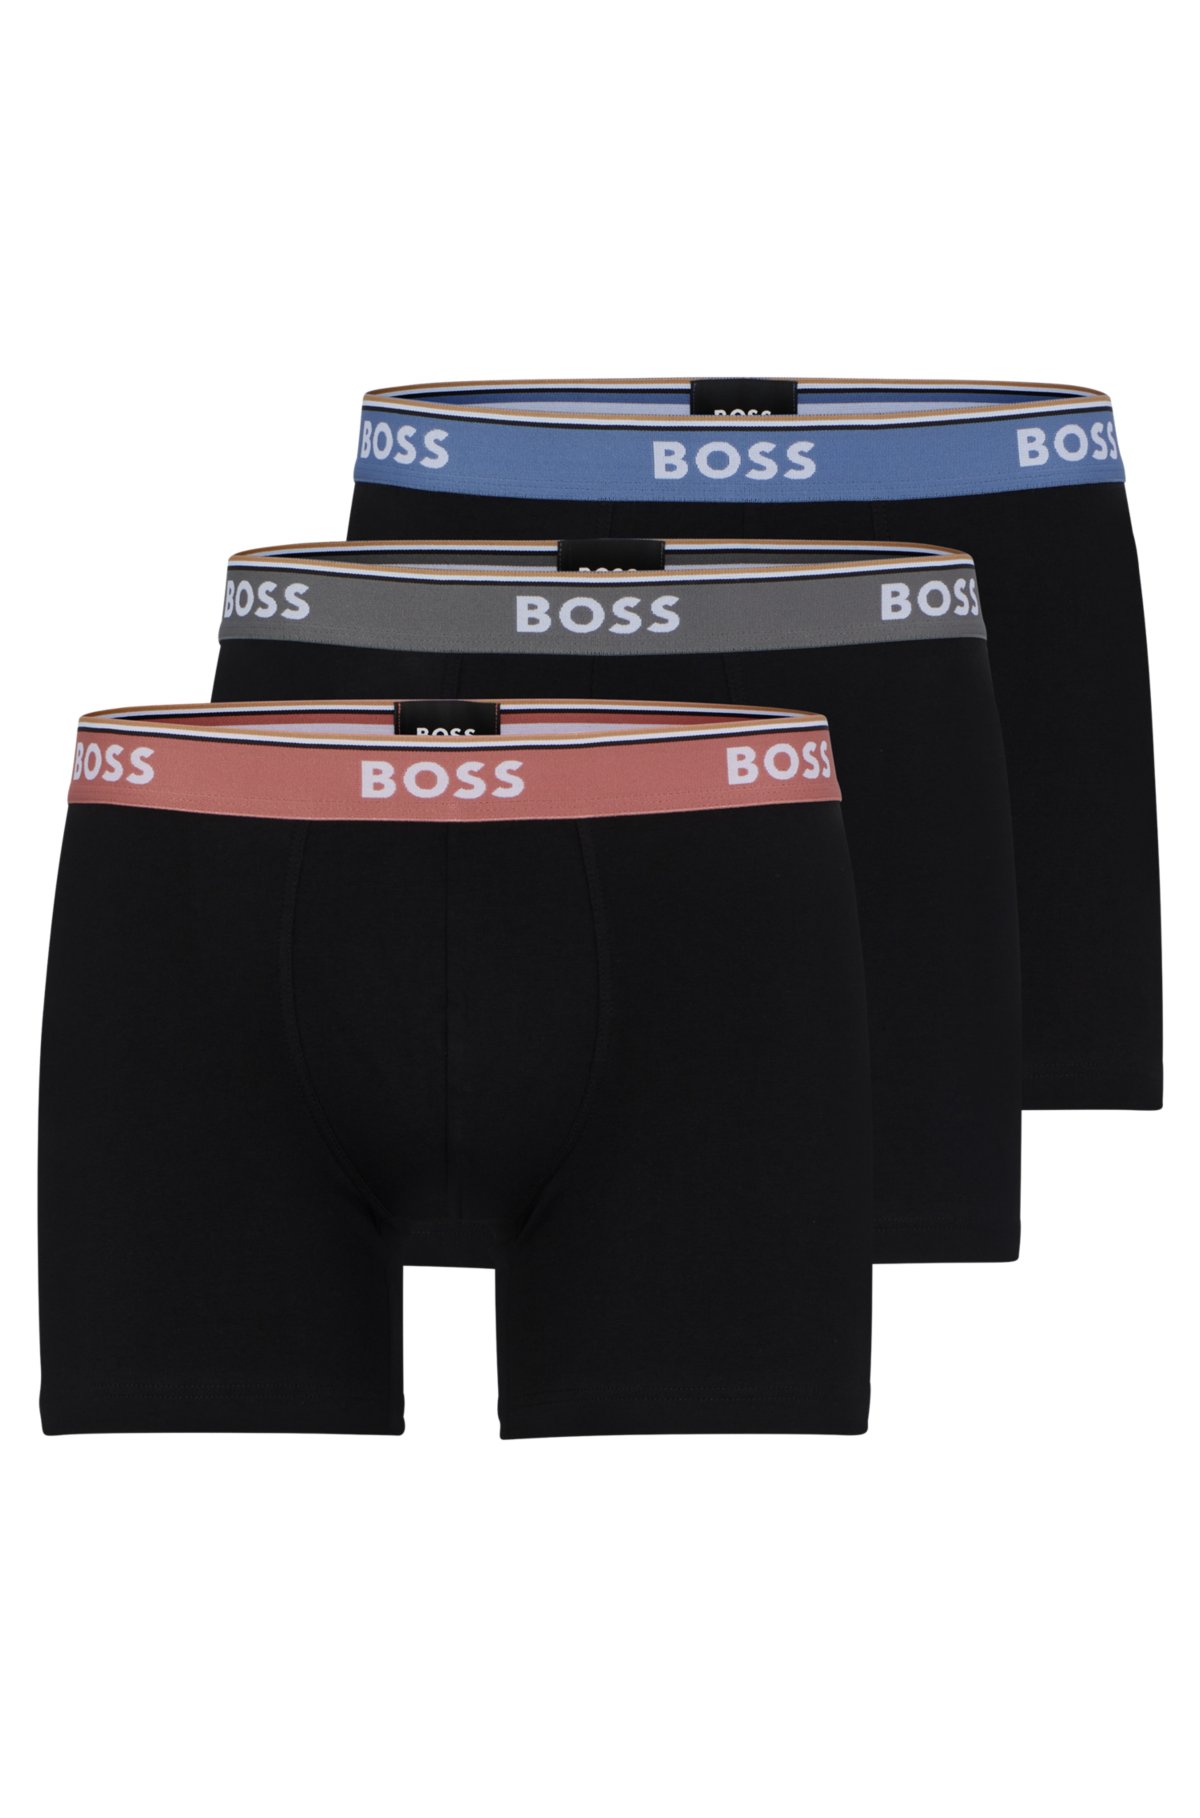 BOSS - Three-pack briefs boxer of waistbands logo with